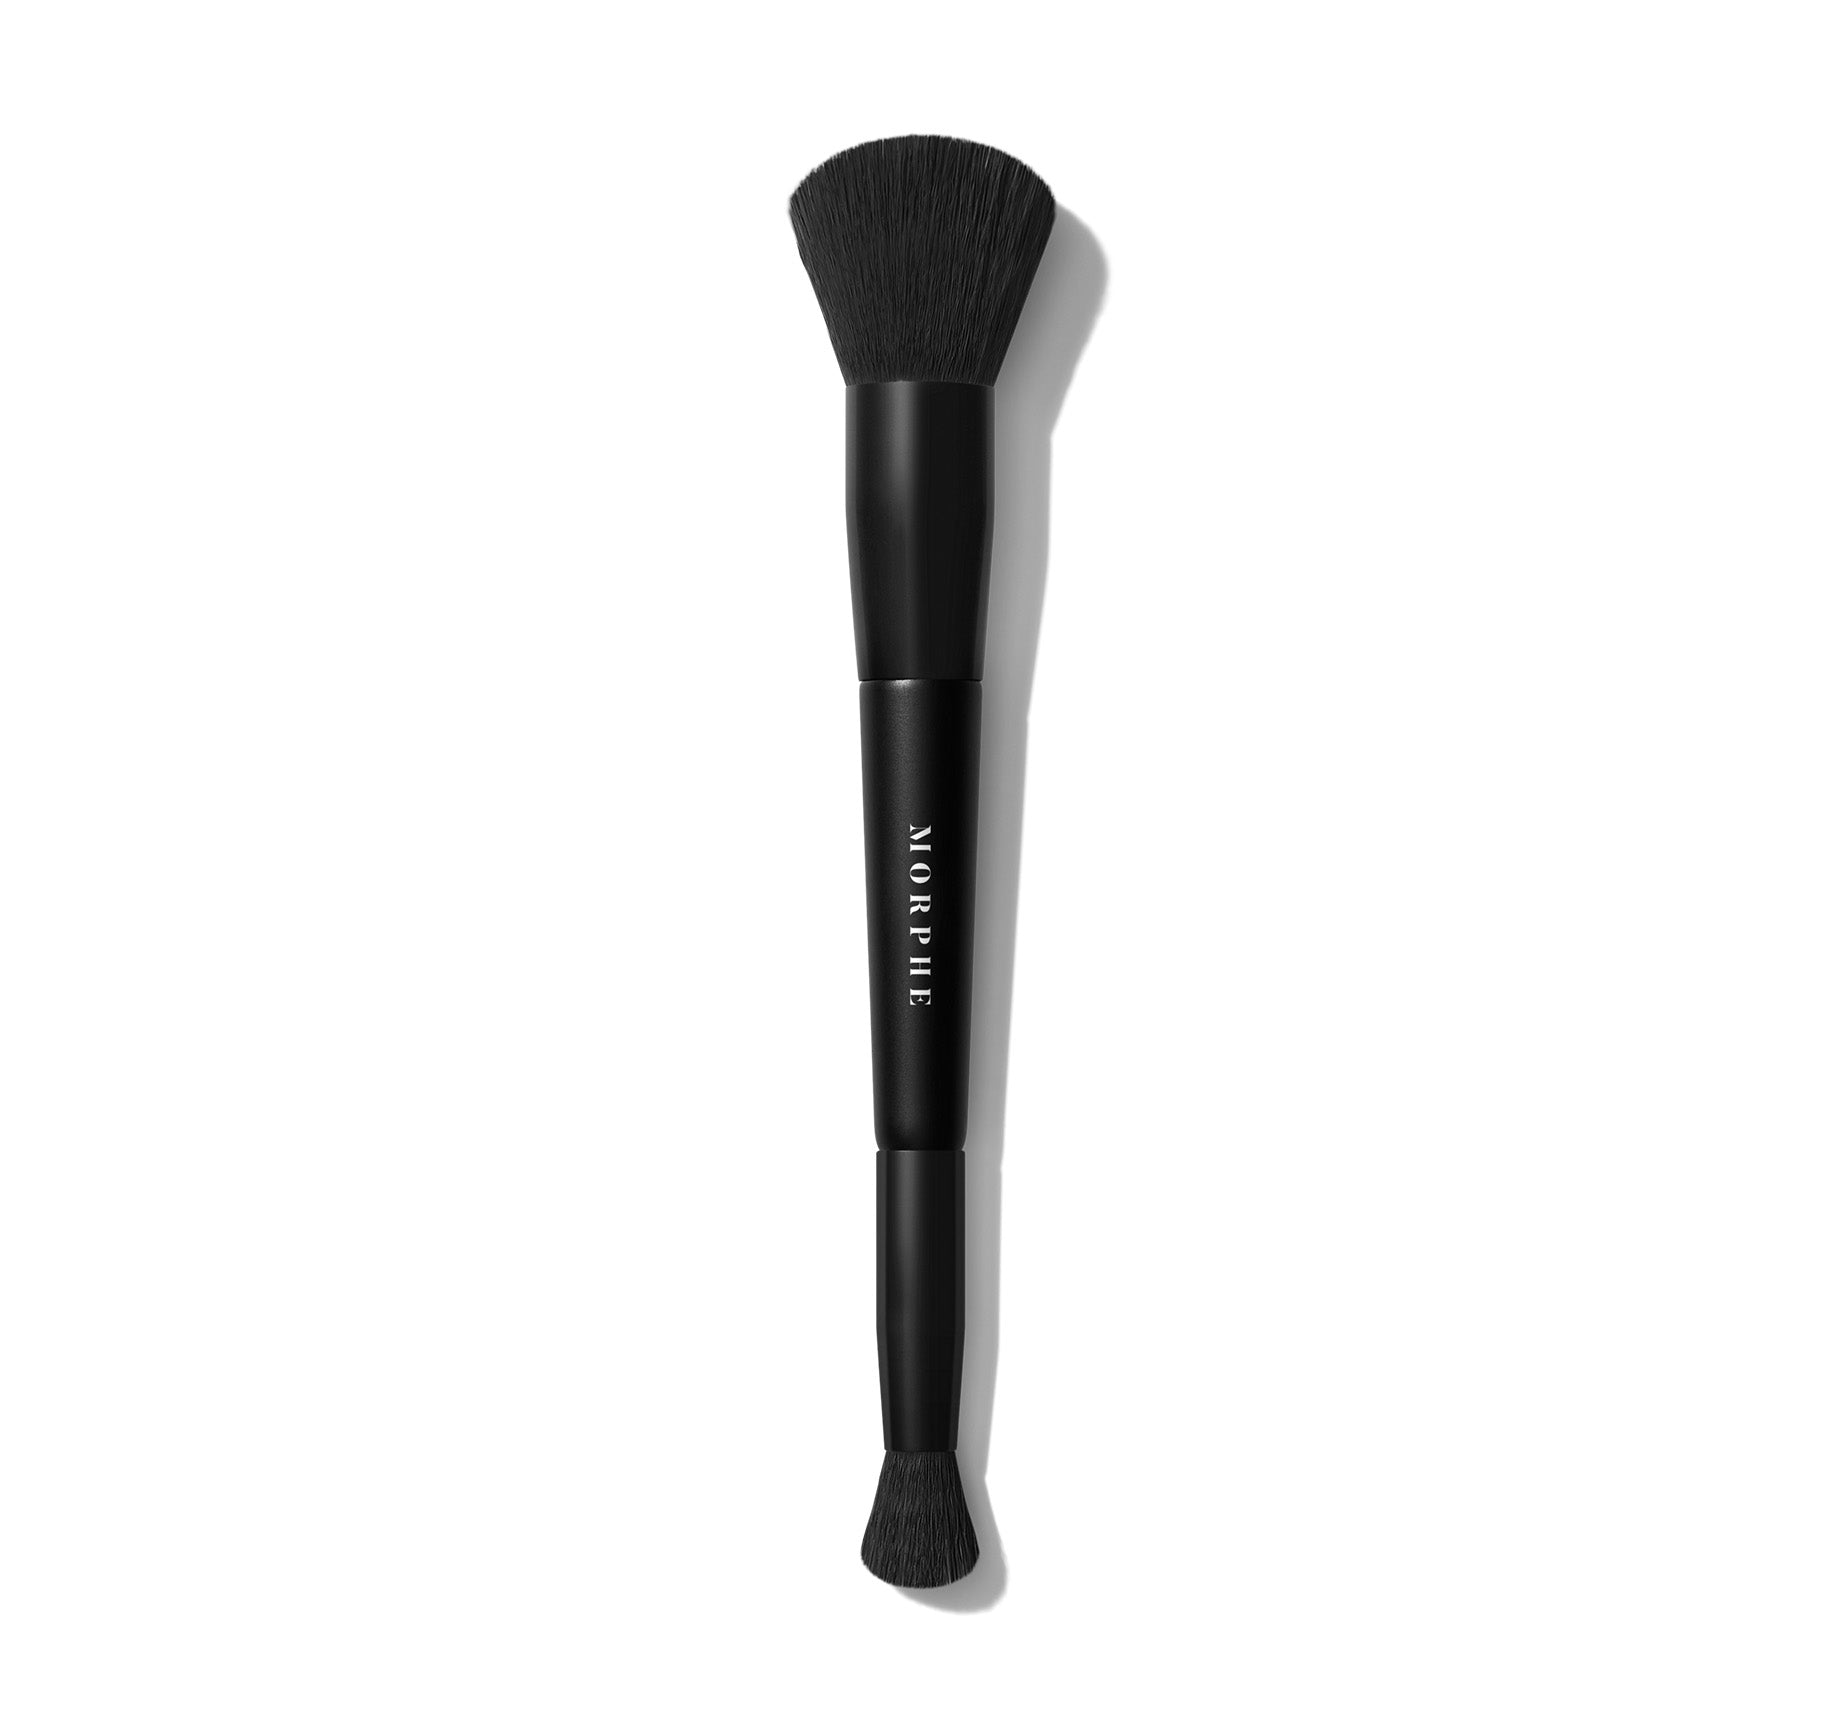 M101 Lightform Dual Ended Complexion Brush - Image 1